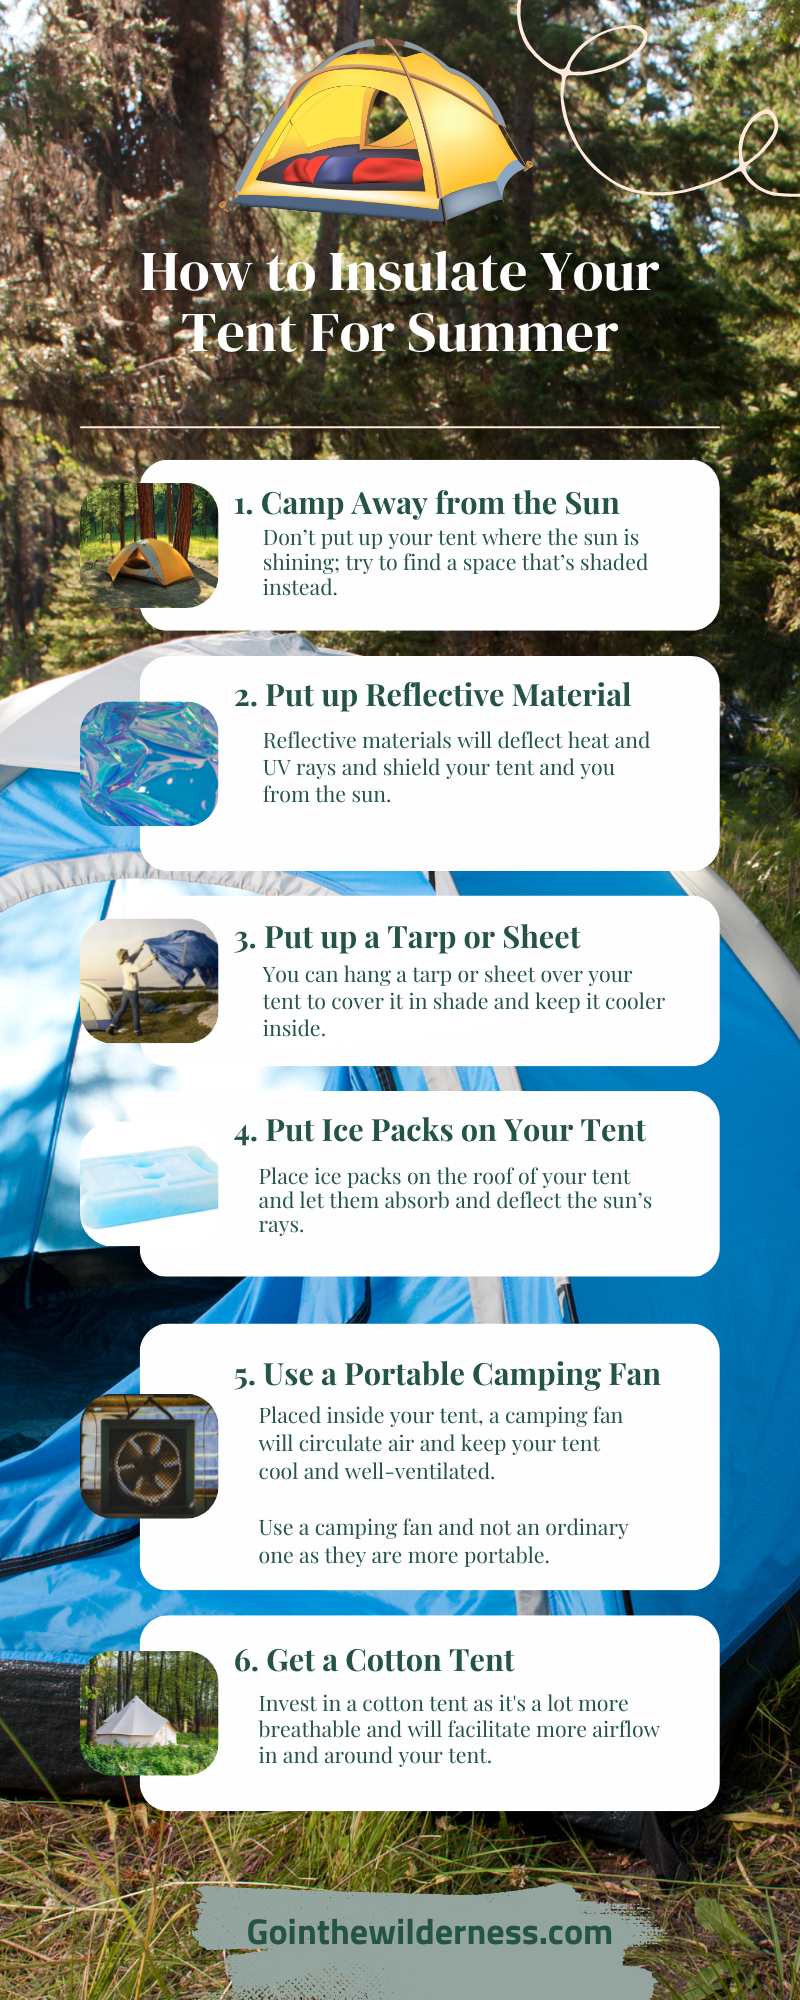 How to Insulate Your Tent For Summer